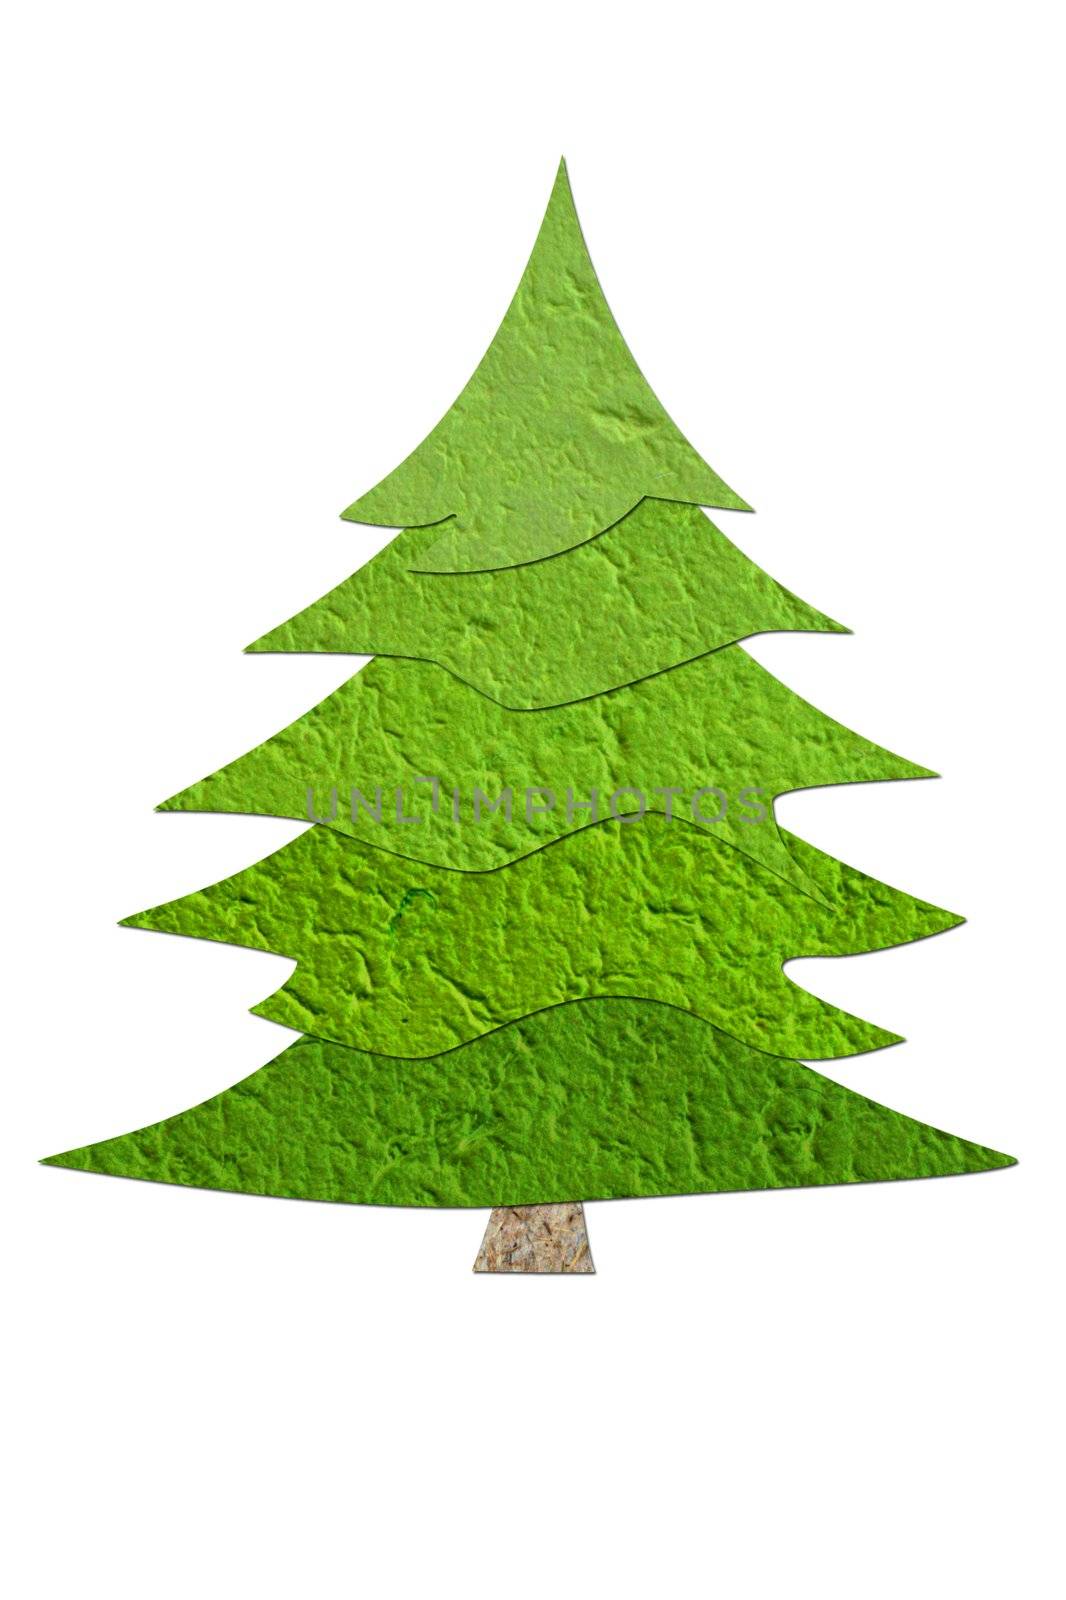 Mulberry paper Christmas tree and white background.